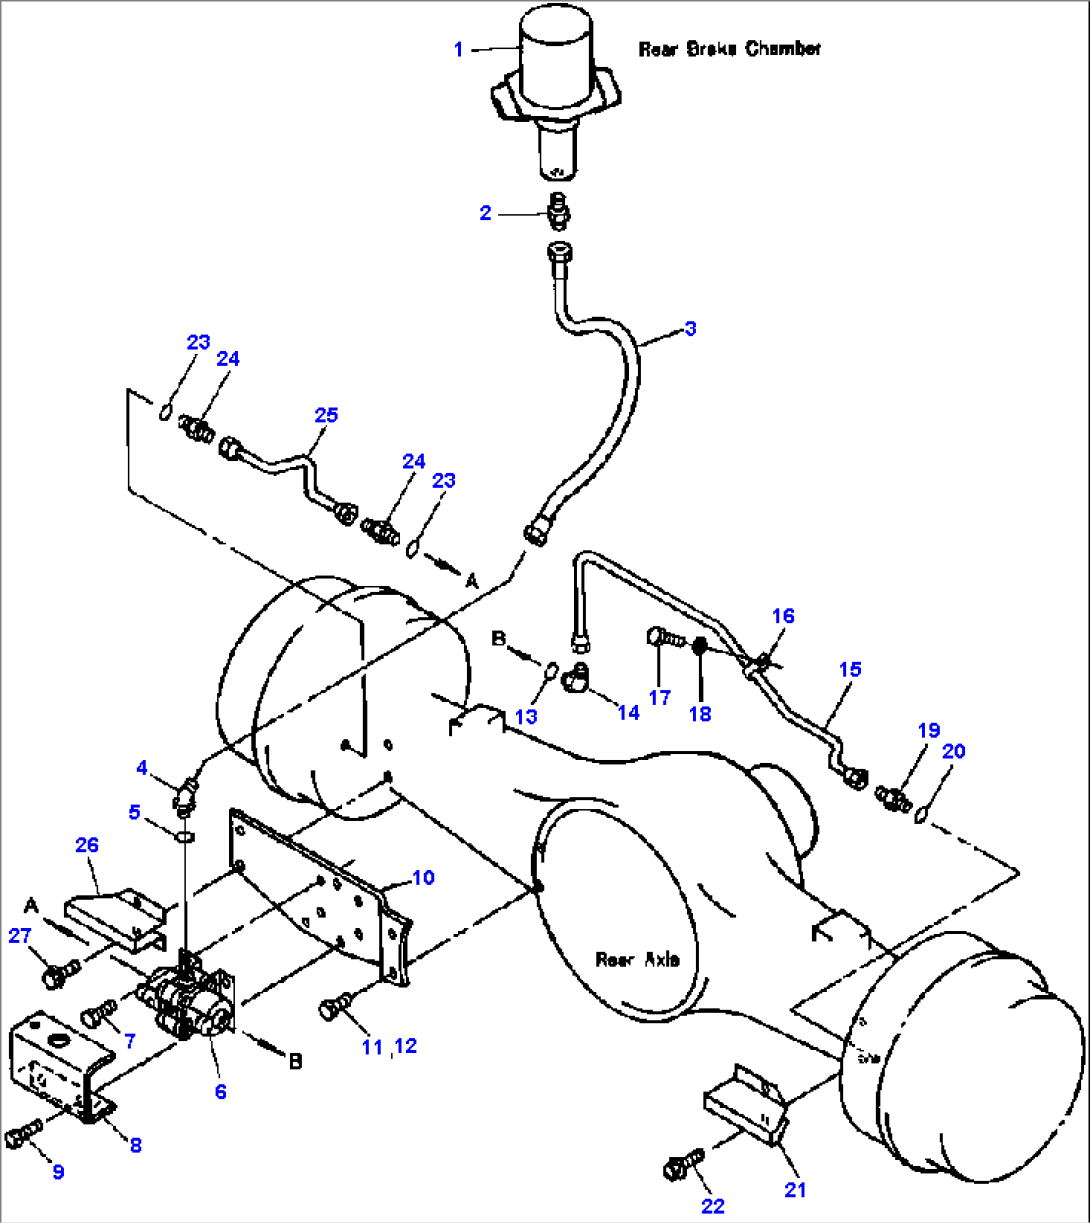 FIG NO. 3721 BRAKE OIL PIPING BRAKE CHAMBER TO REAR AXLE